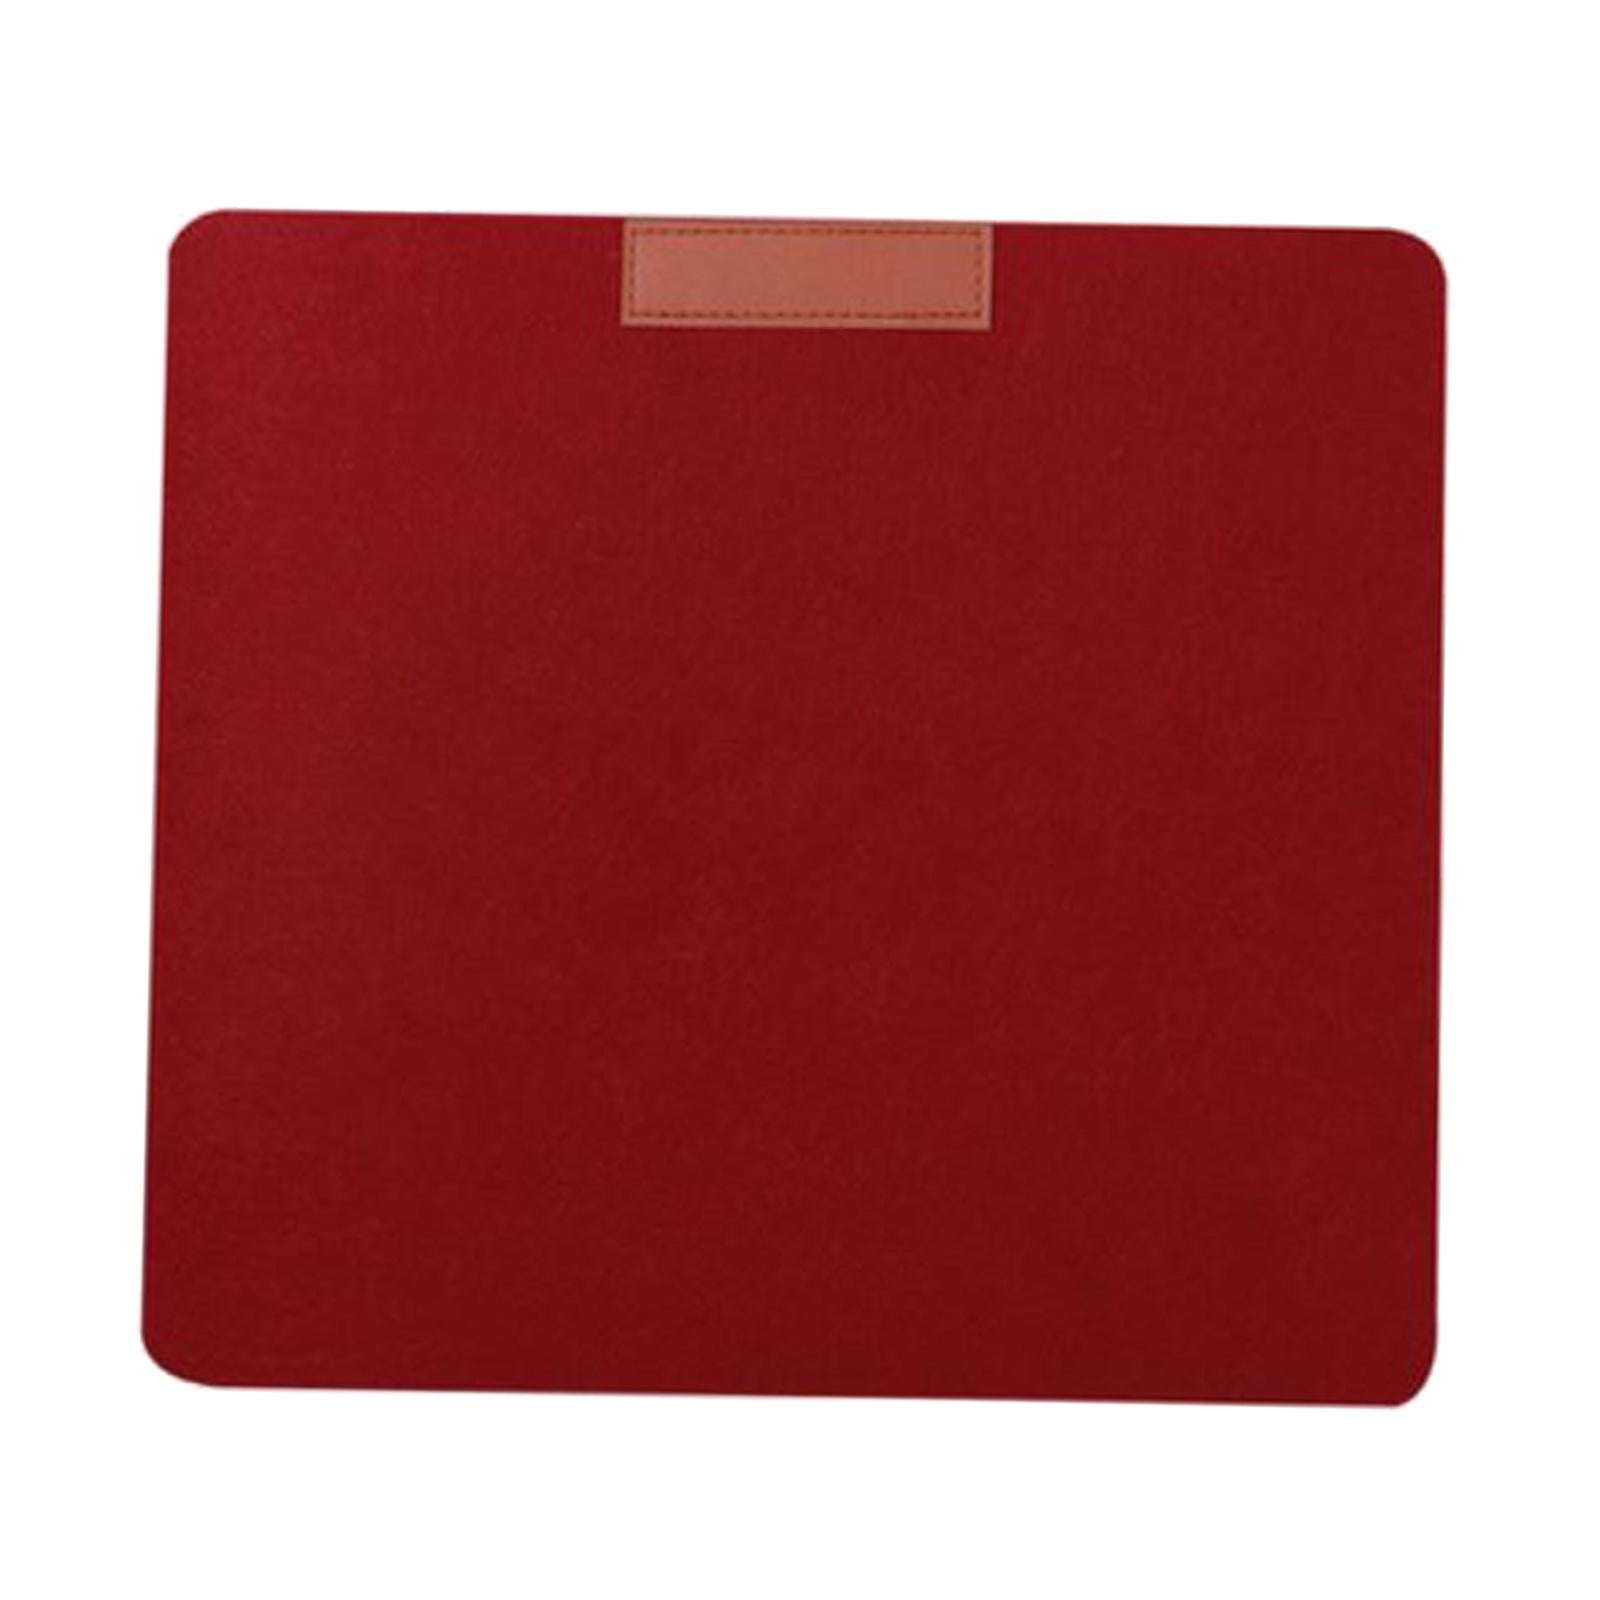 Soft Mouse Pad Table Computer Desk Mat Felt Laptop Cushion Office Home Red Wine